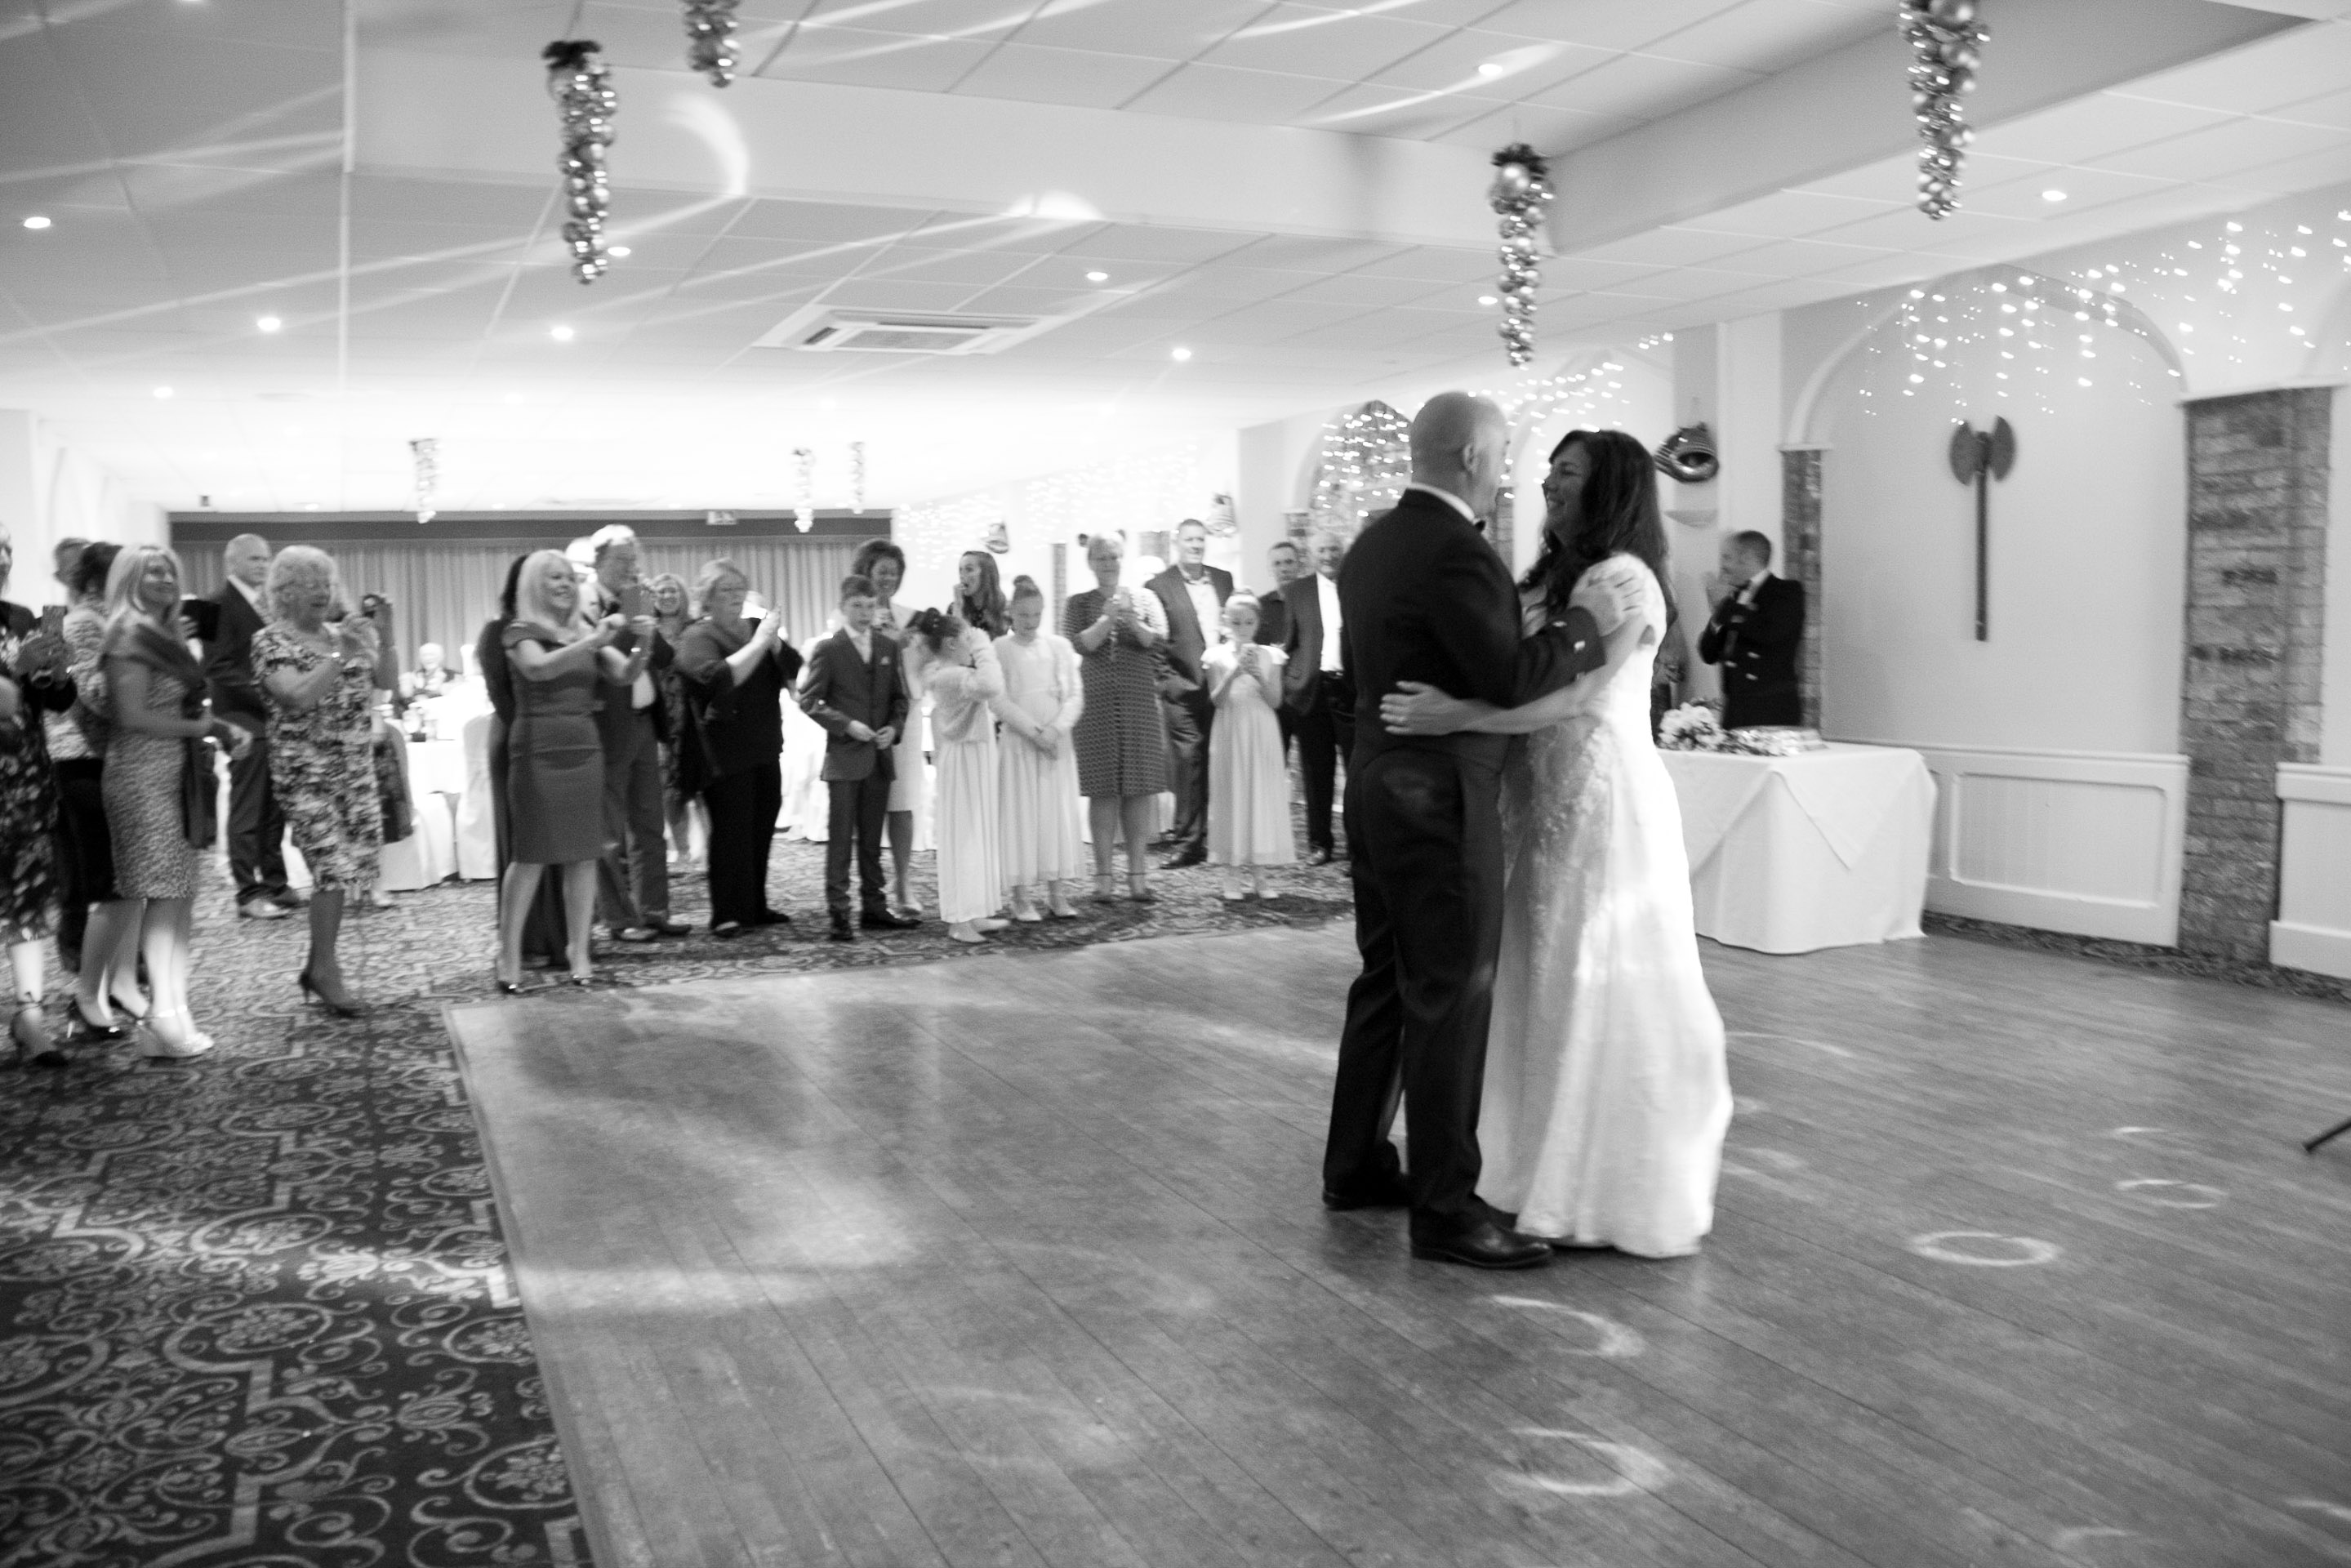 First Dance, At Last by Etta James